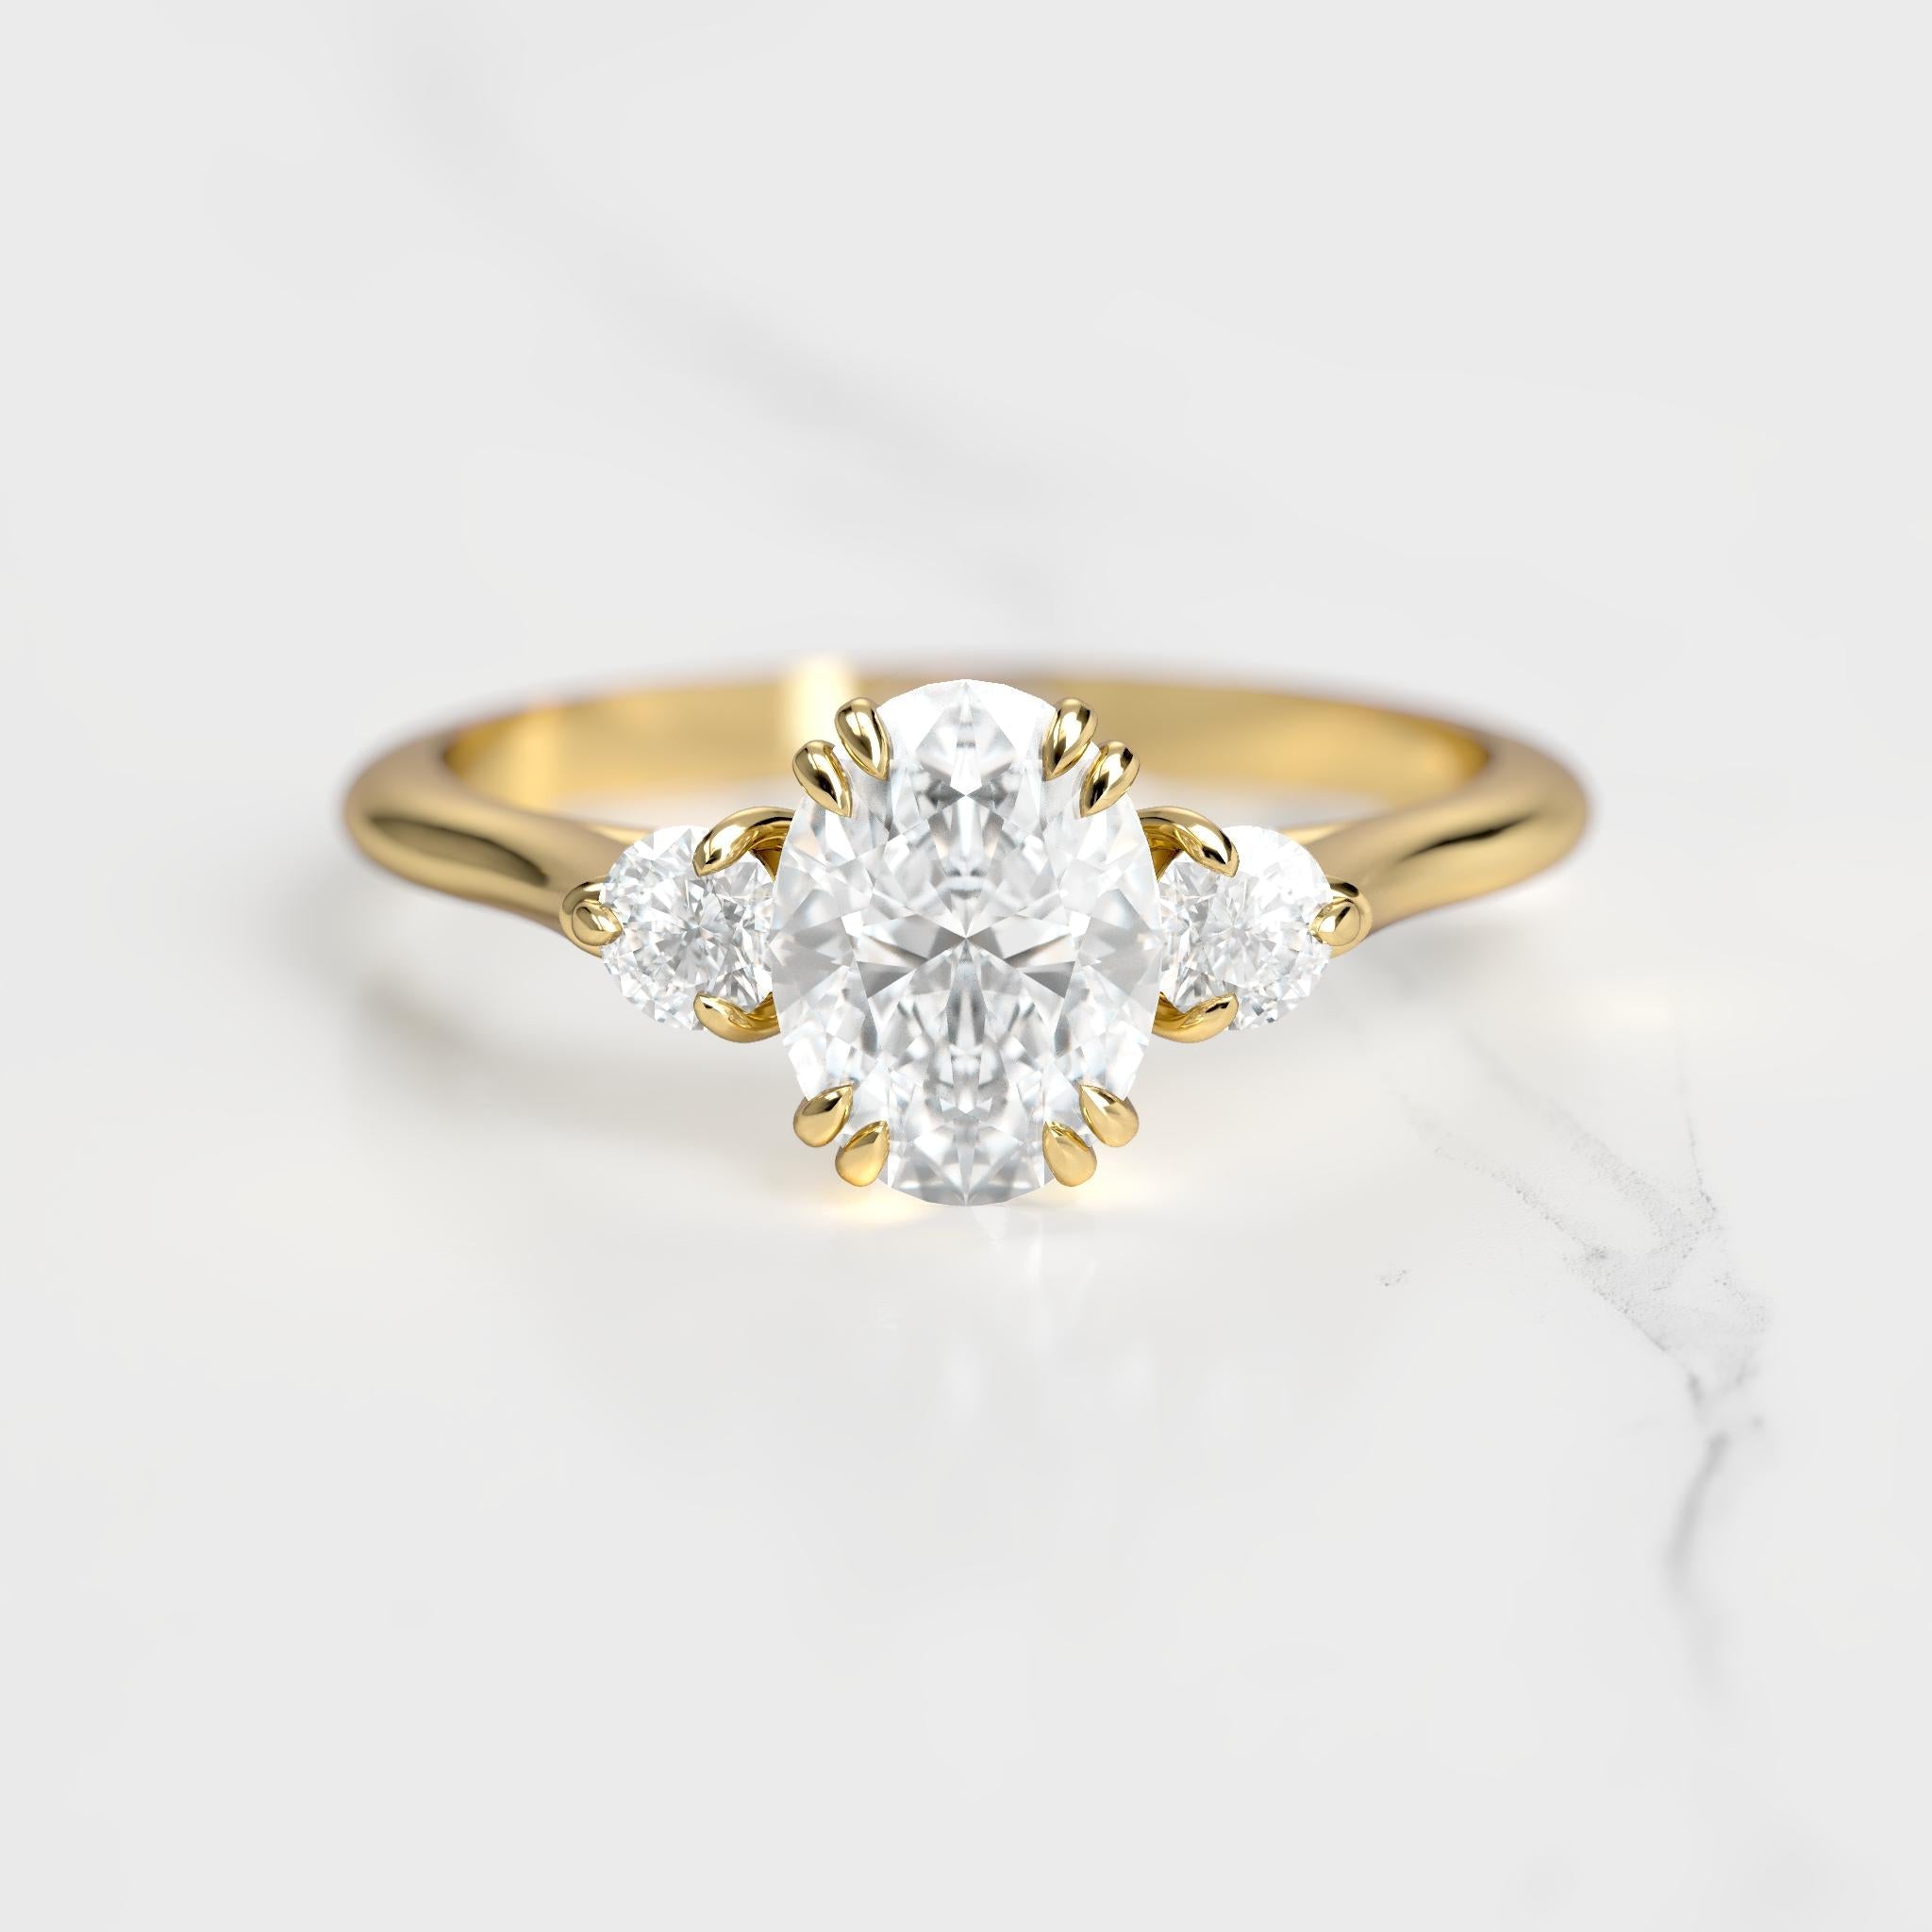 Oval Diamond Ring With Accent Stones - 18k yellow gold / 1ct / natural diamond